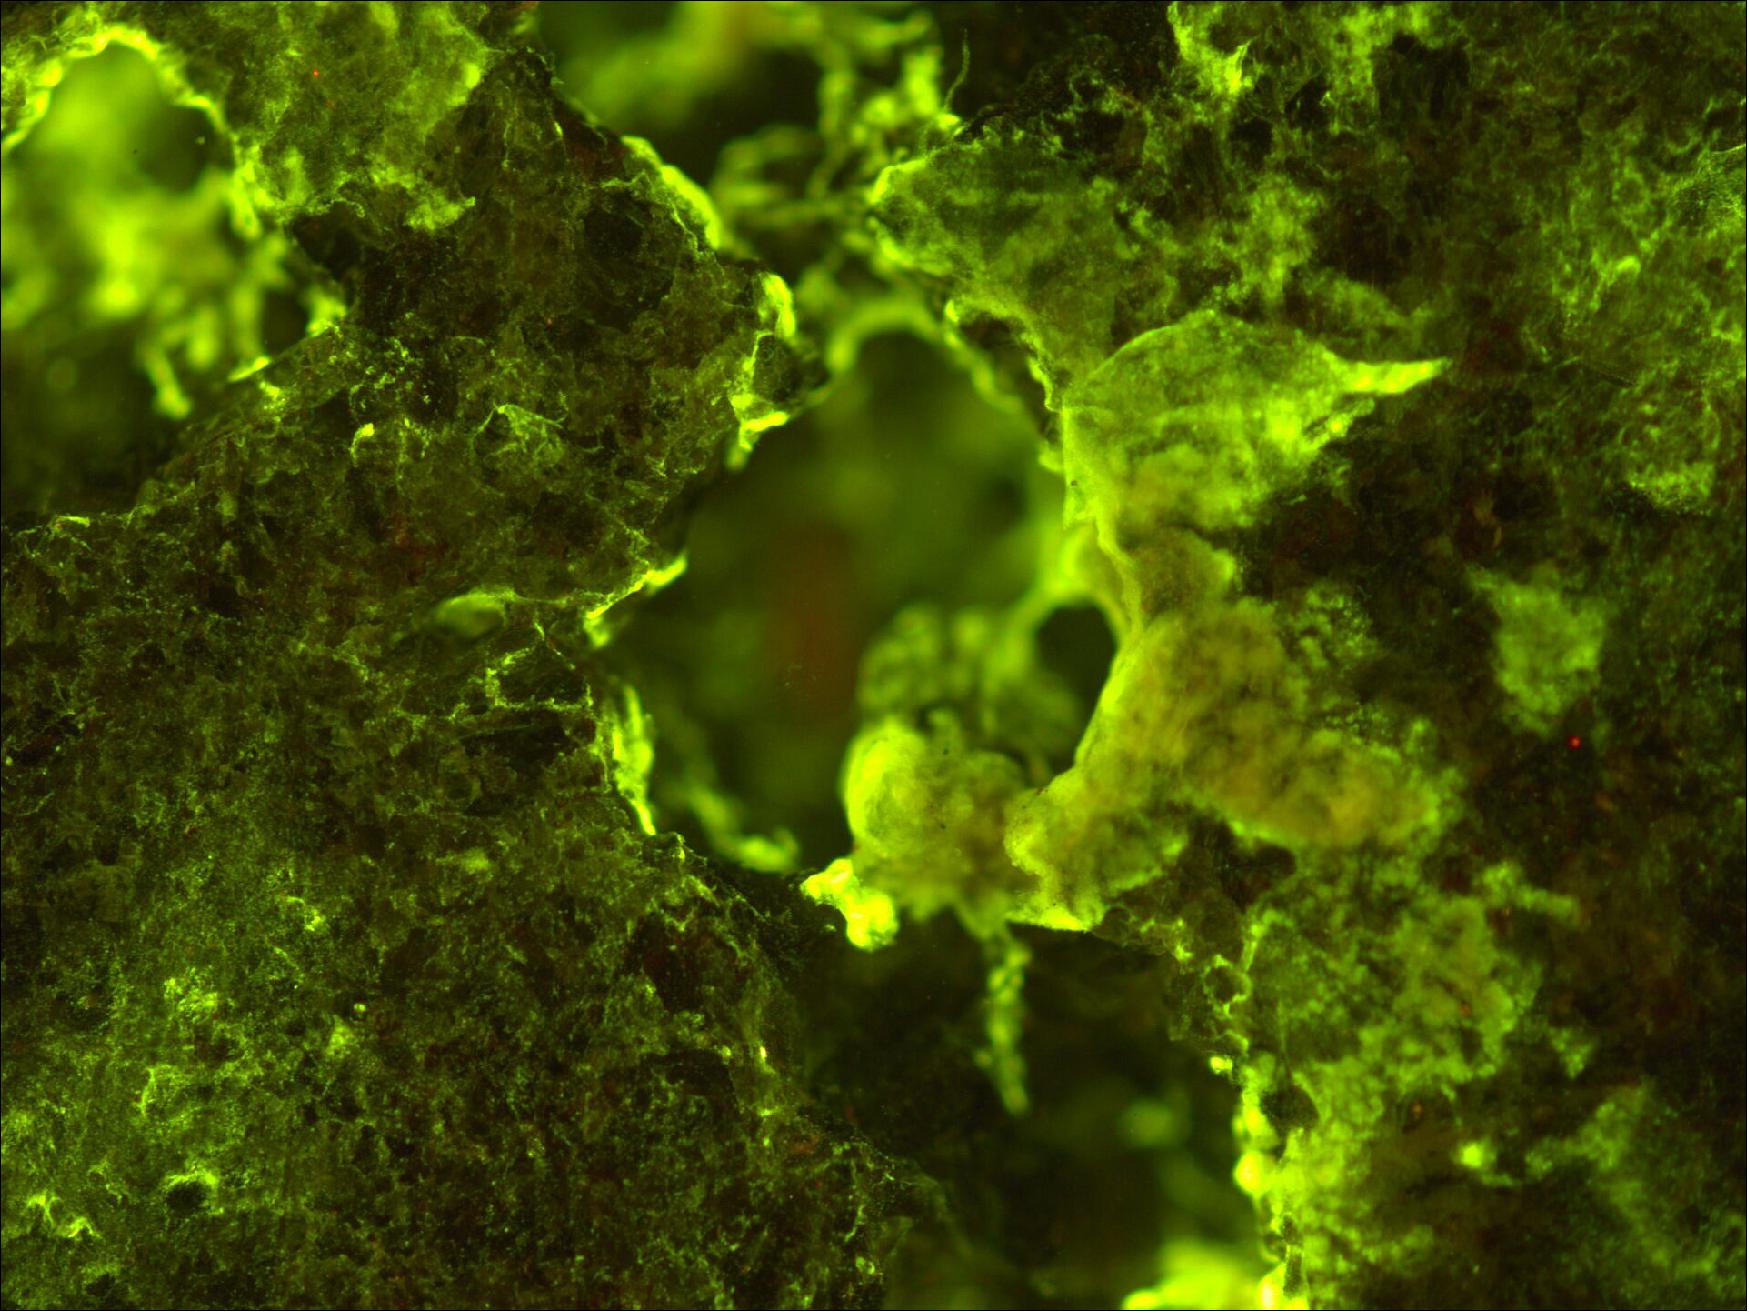 Figure 13: This fluorescent work of art captures the beauty of biofilms, or the growth of microbes on rocks. In this microscopic image, Sphingomonas desiccabilis is growing on basalt. It is one of three microbes chosen for the BioRock experiment, run by a research team from the University of Edinburgh in the UK, that will test how altered states of gravity affect biofilm formation on the International Space Station. Microbes are able to weather down a rock from which they can extract ions. This natural process enables biomining, in which useful metals are extracted from rock ores. Already a common practice on Earth, biomining will eventually take place on the Moon, Mars and asteroids as we expand our understanding and exploration of the Solar System. In the meantime, microbes will be used for many other processes that involve microbial growth on rocks, such as making soil (image credit: UK Centre for Astrobiology/University of Edinburgh–Rosa Santomartino)